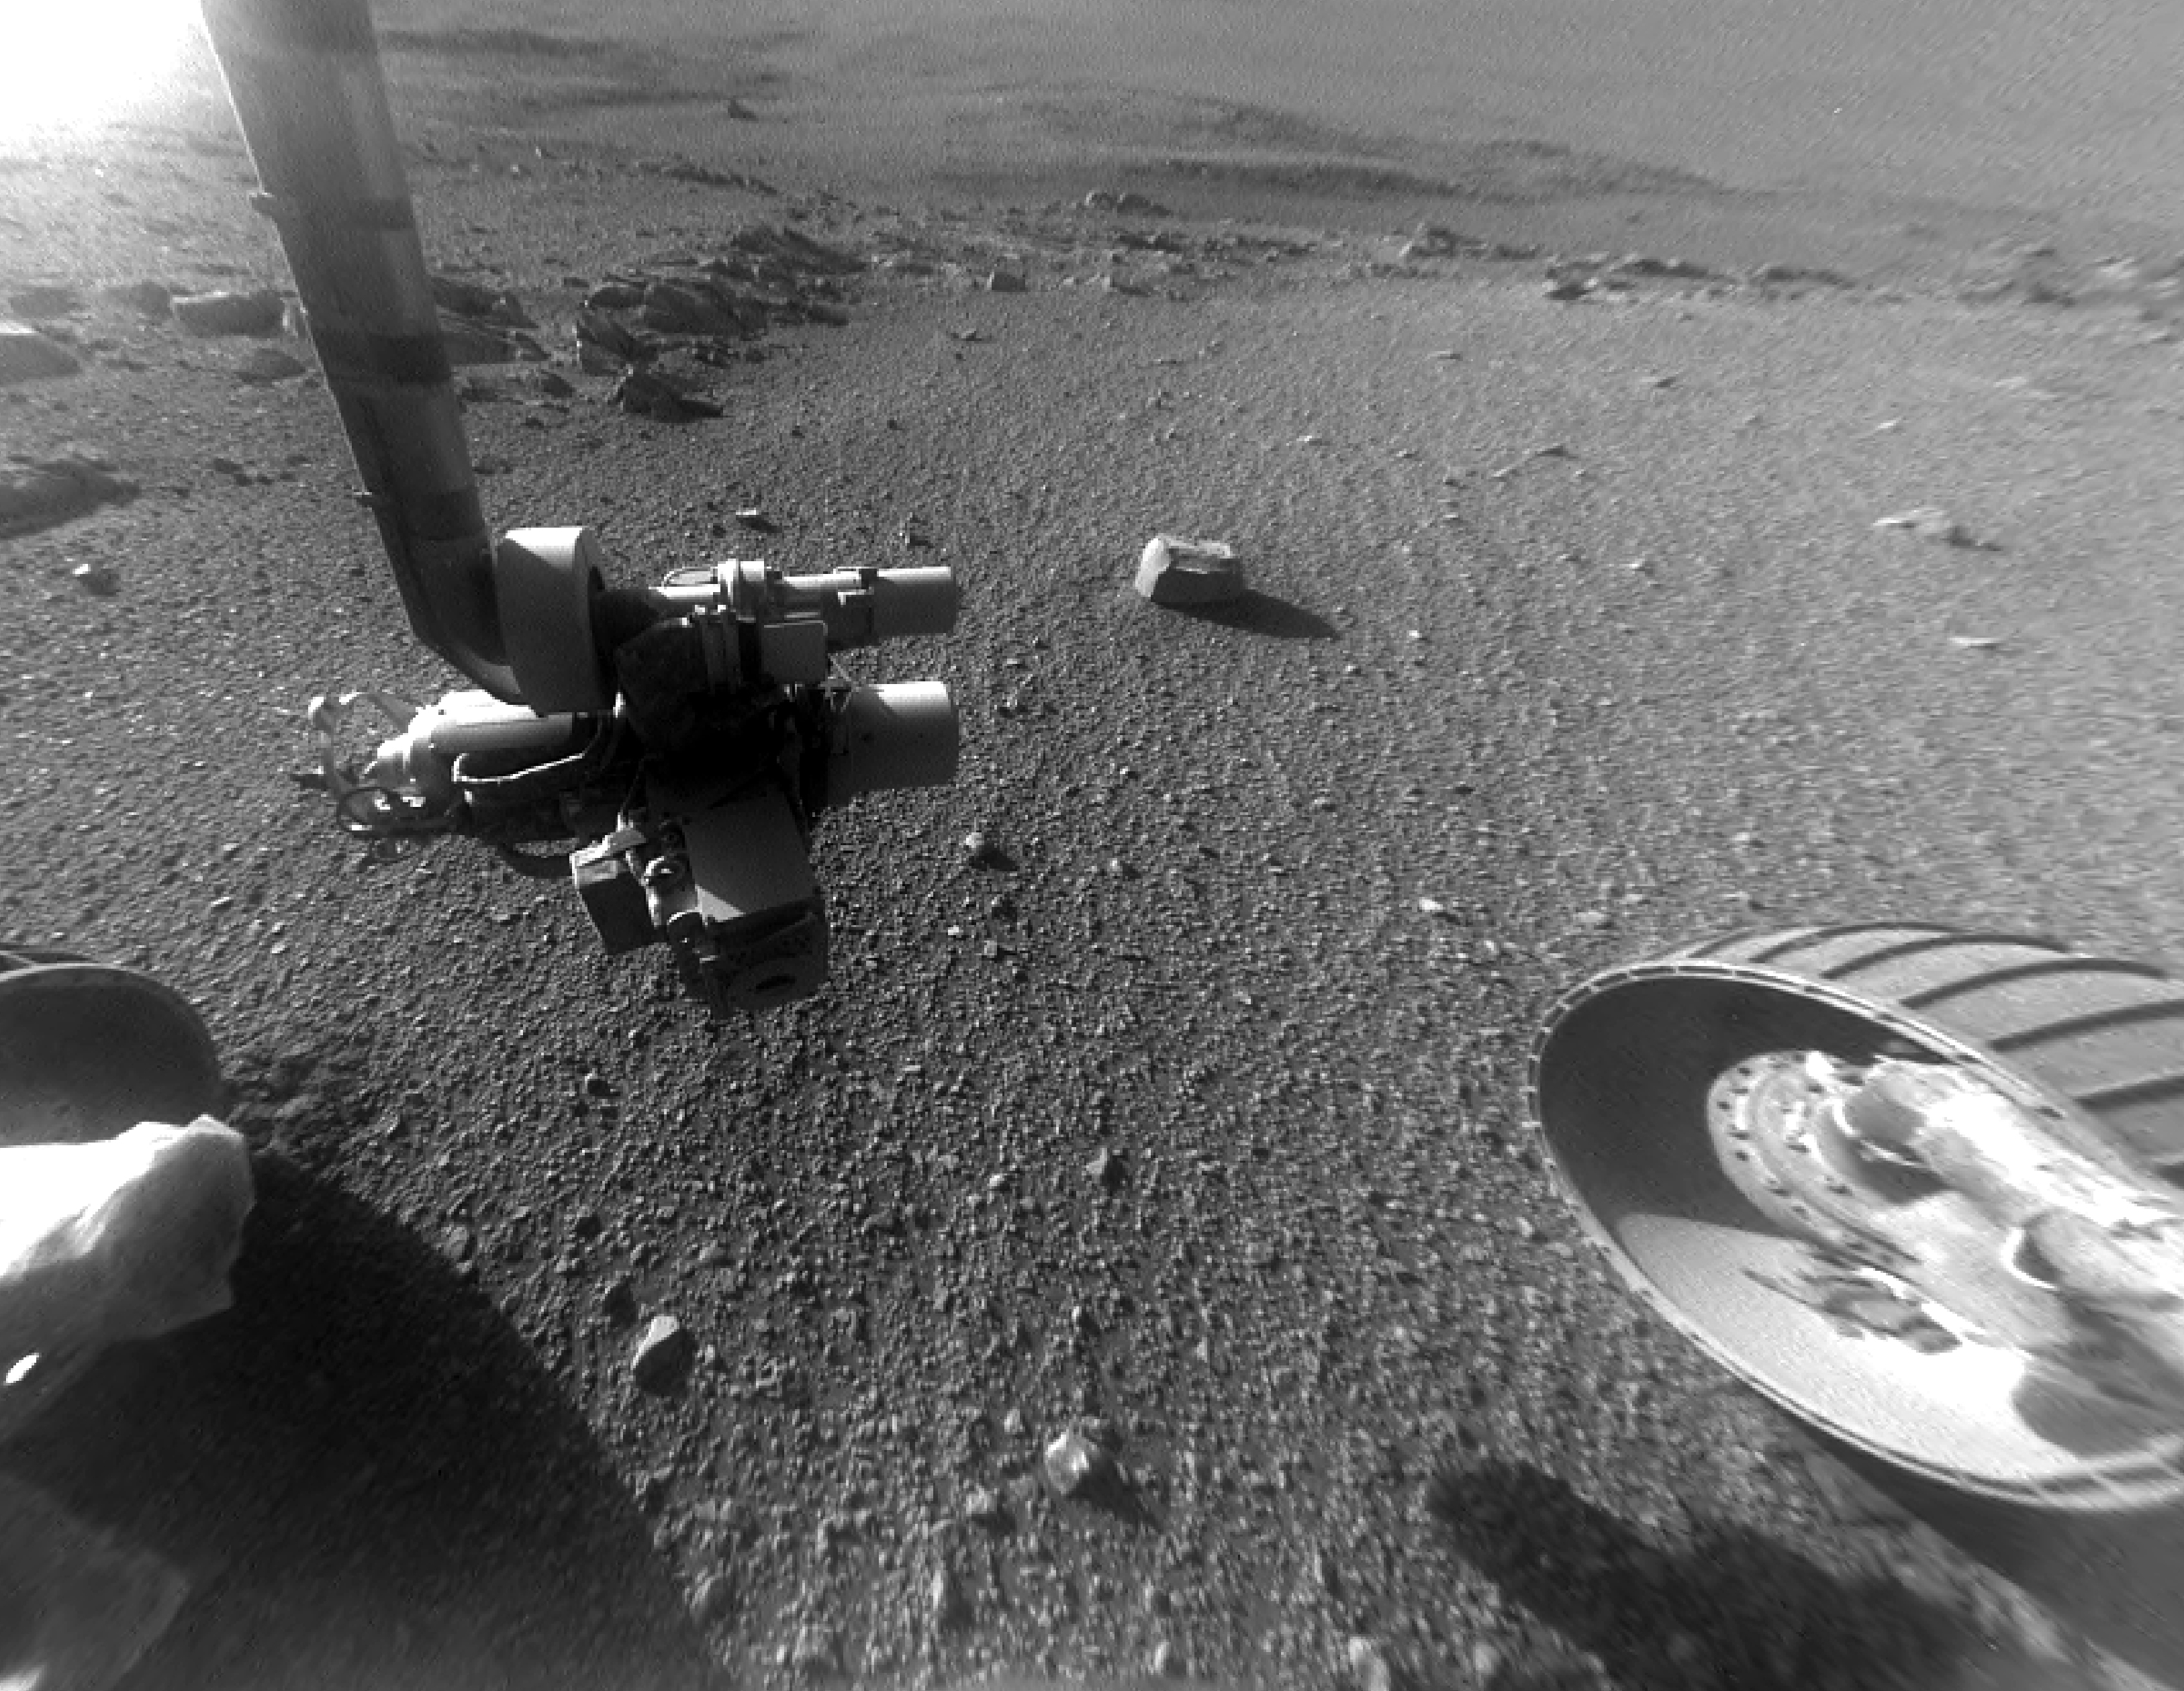 rover wheel and robot arm over rocky ground